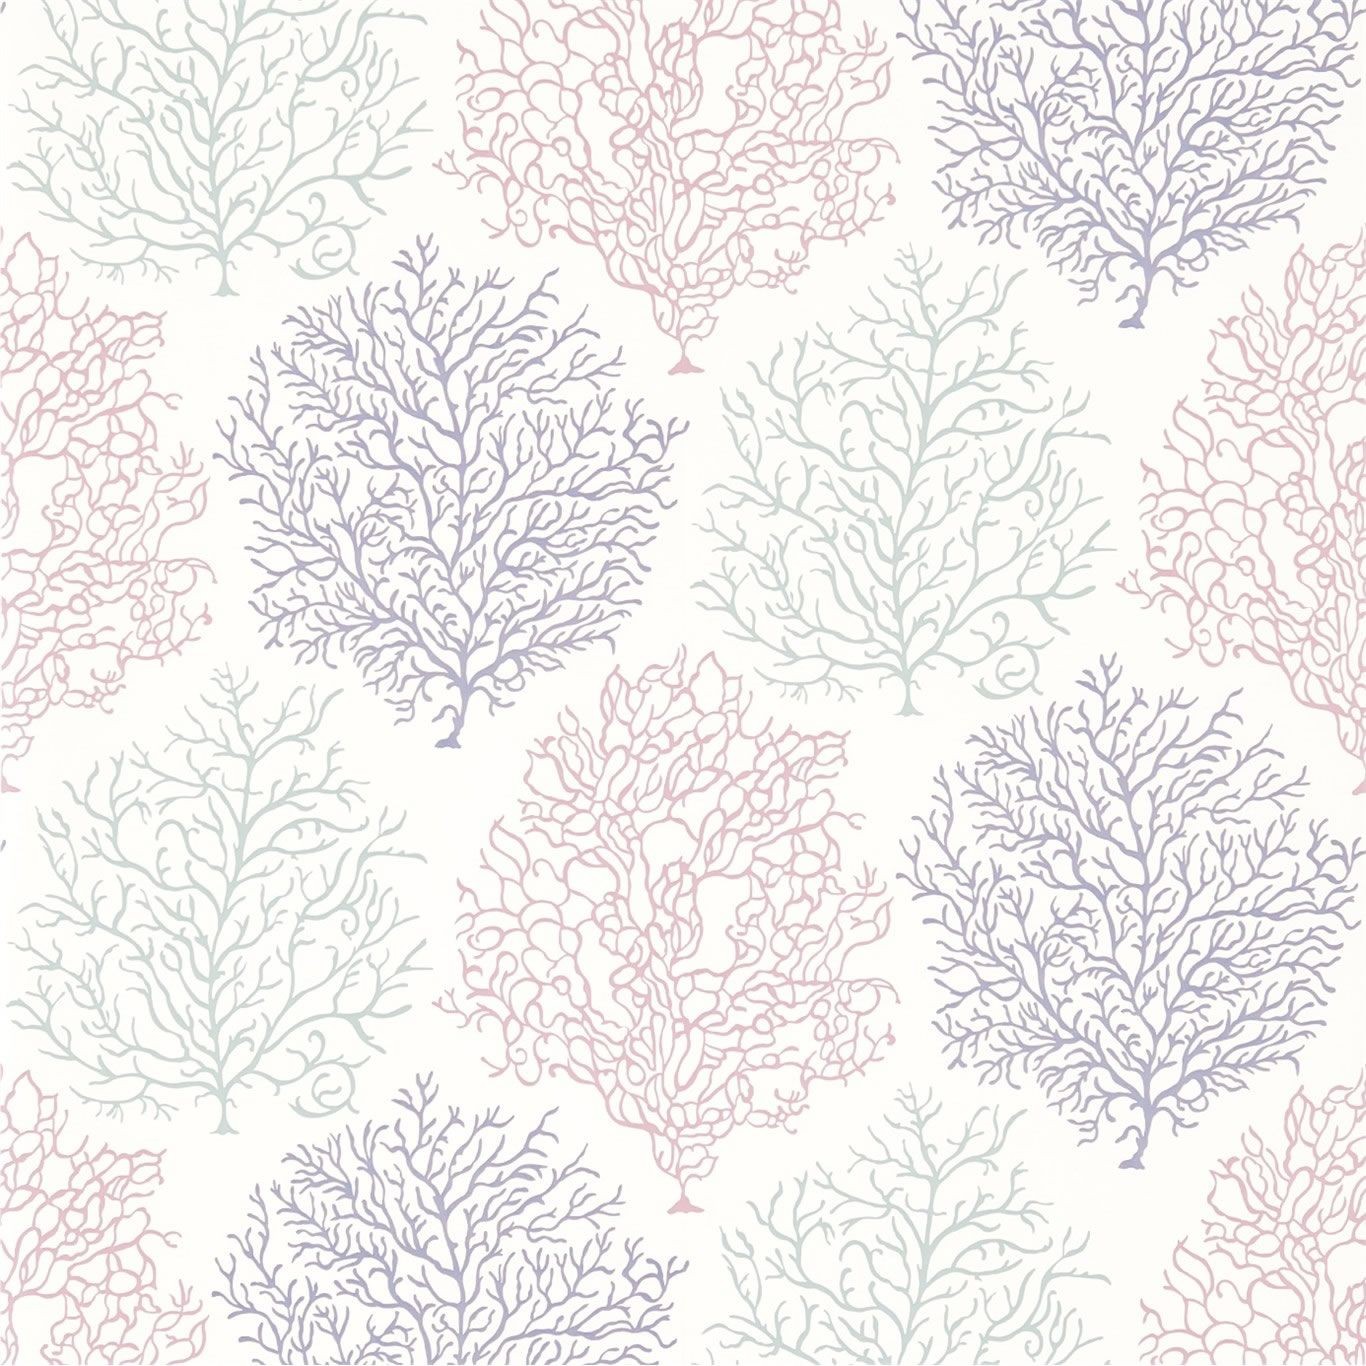 Teal Mauve   213392   Coral Reef   Voyage of Discovery   Sanderson 1366x1366